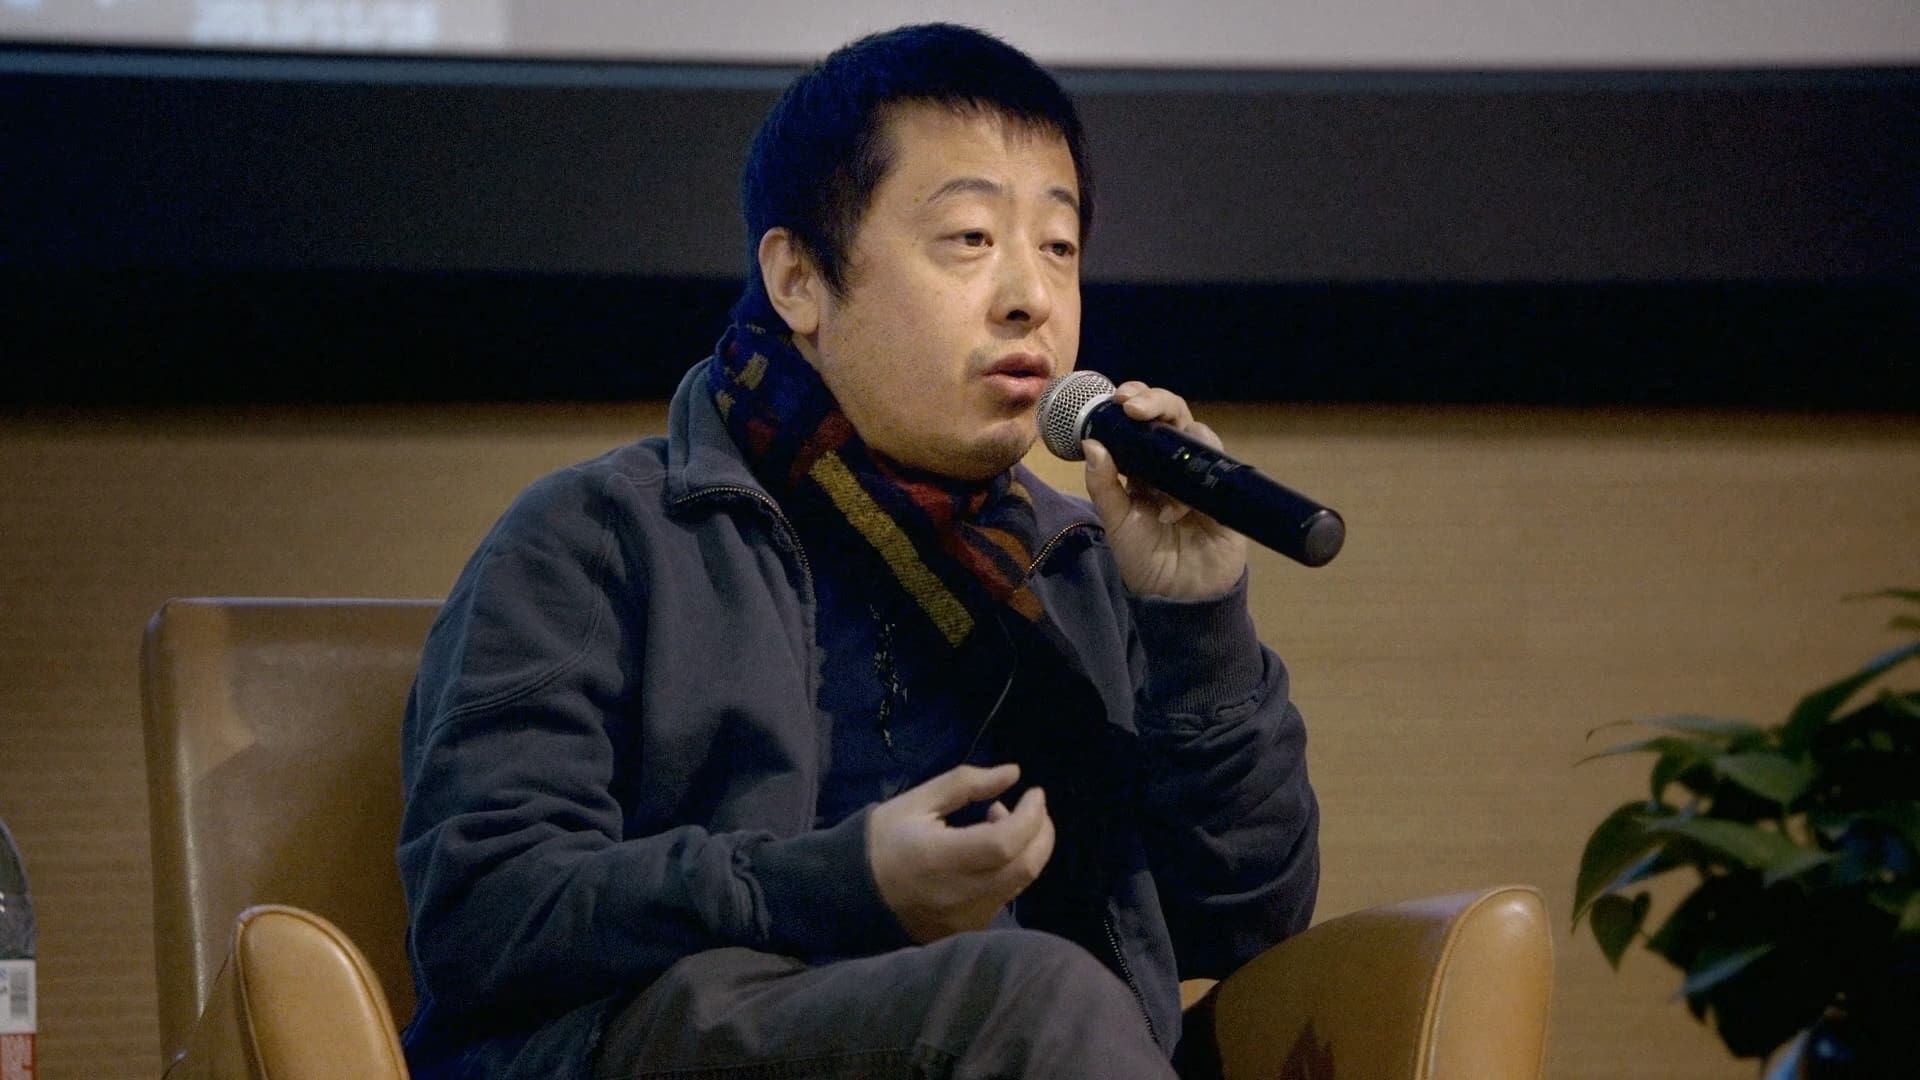 Jia Zhangke, A Guy from Fenyang background